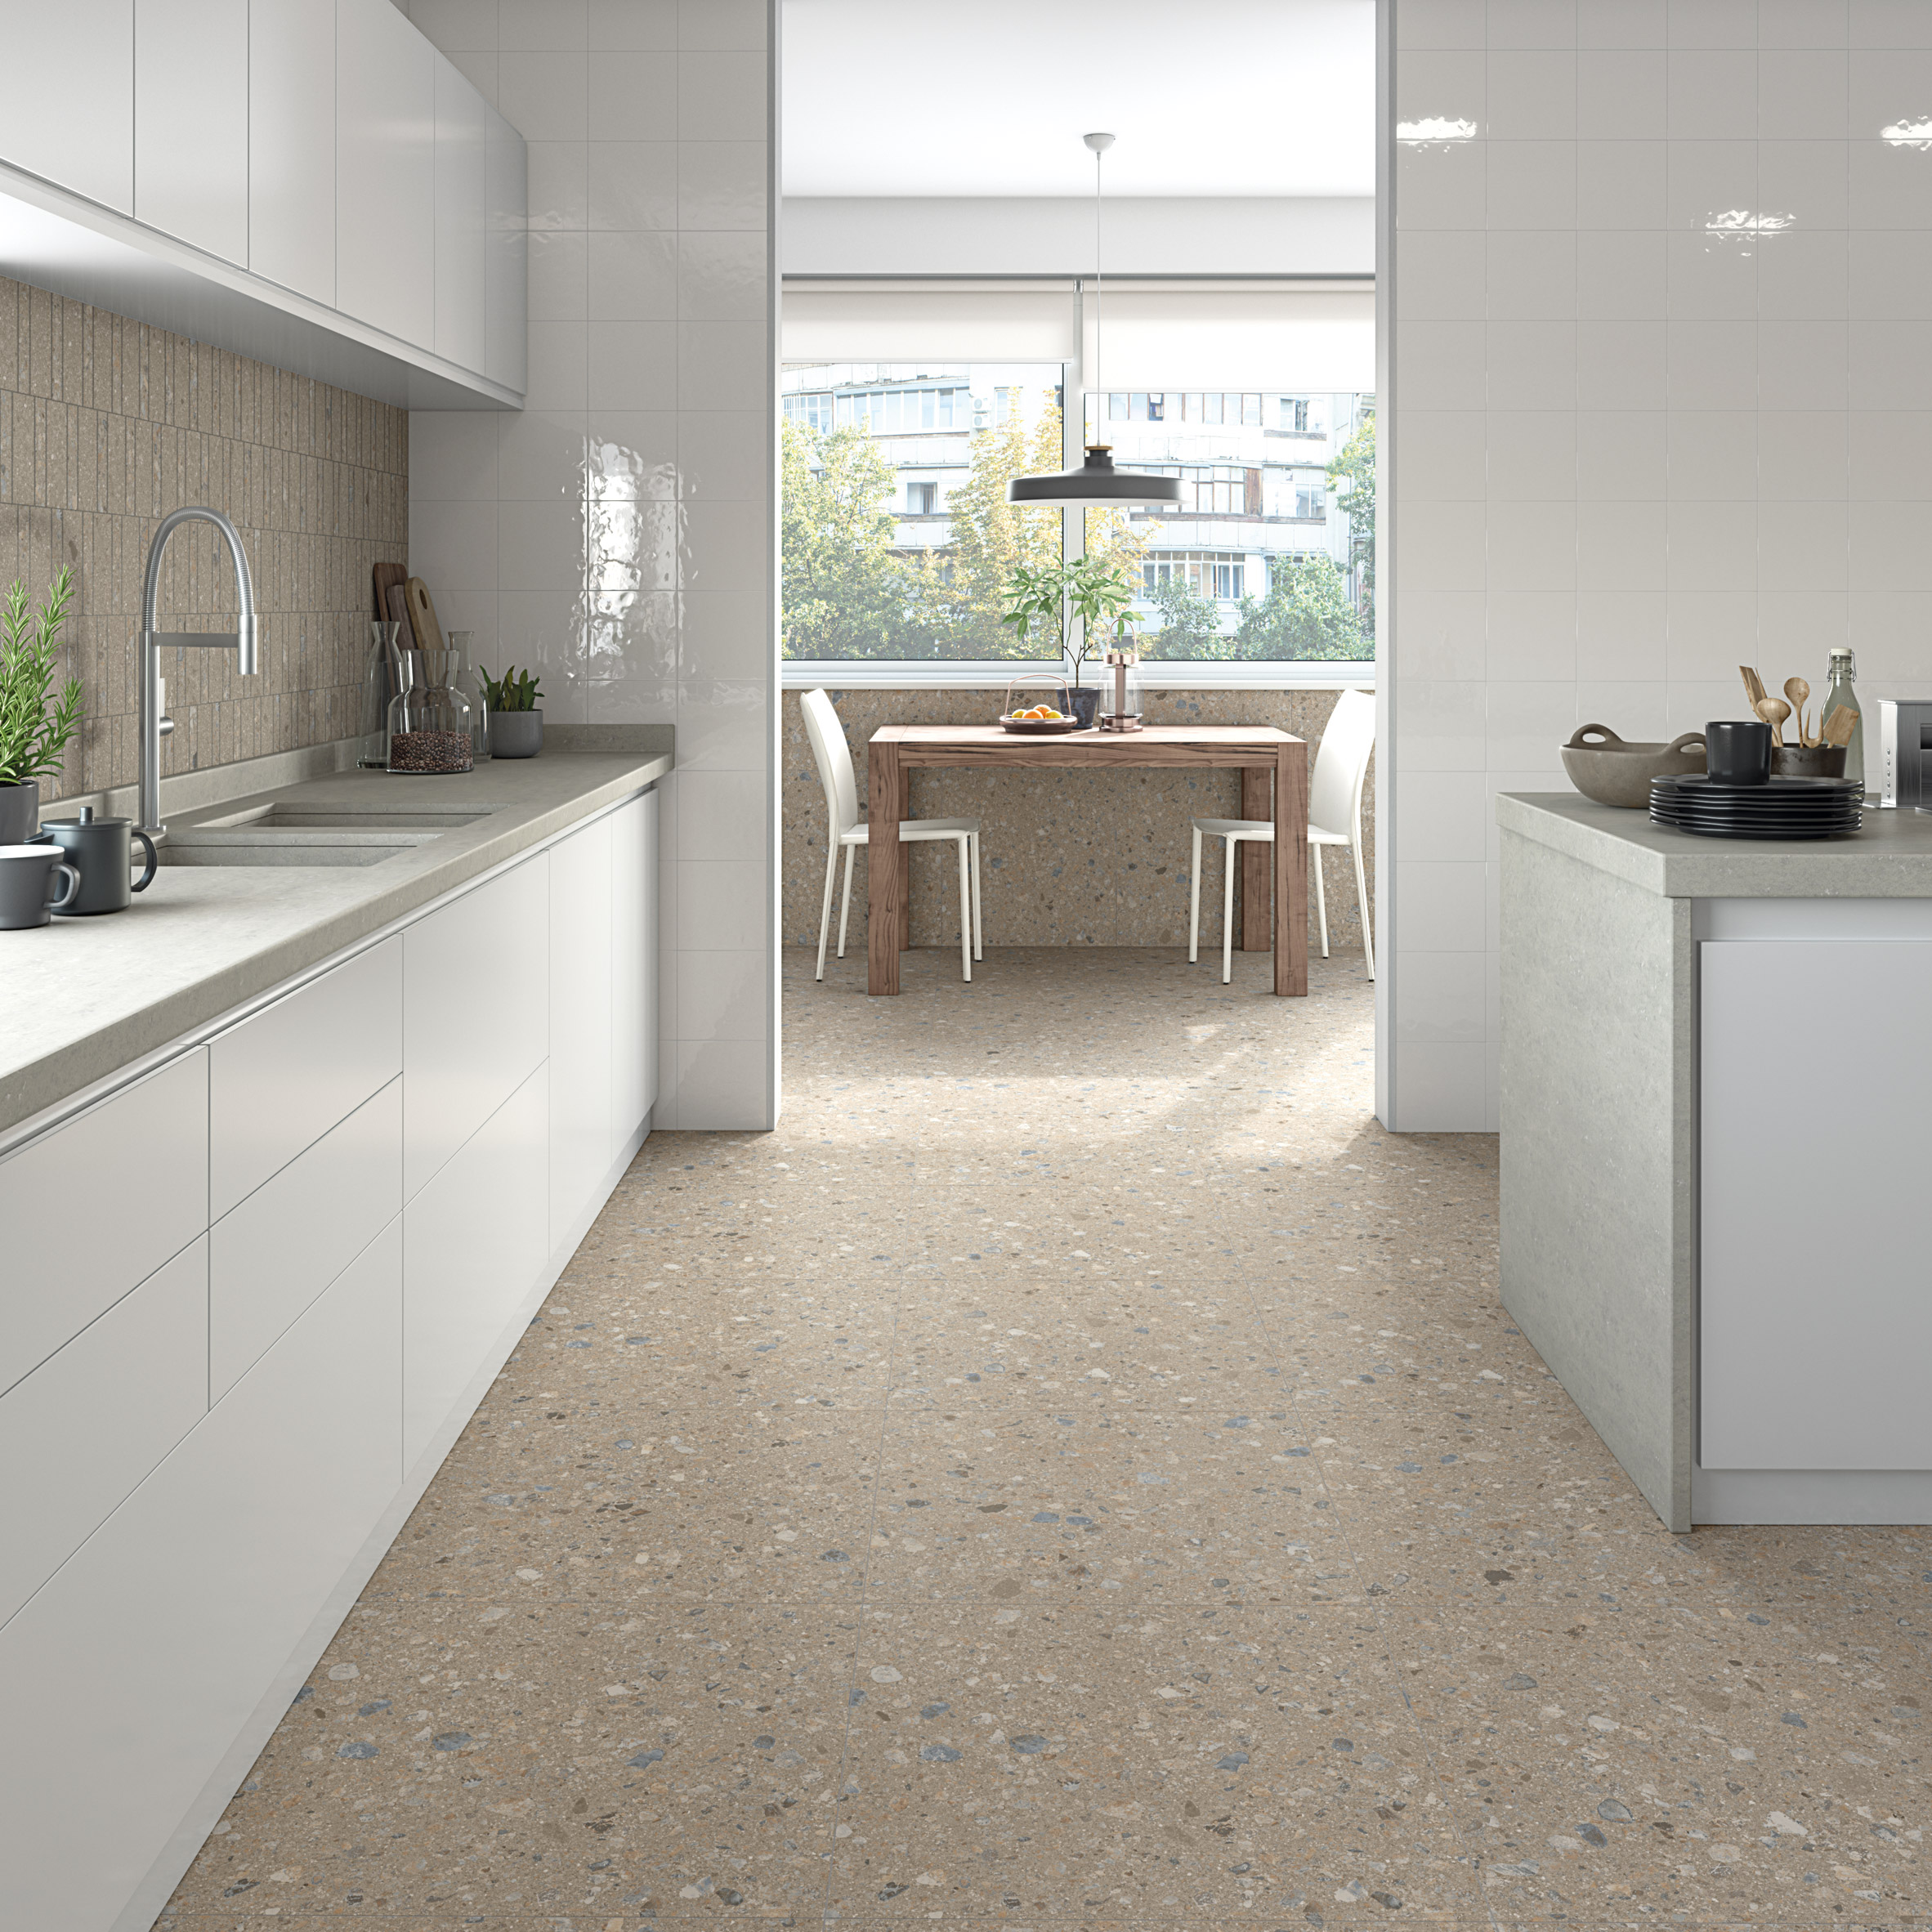 ABIC Anti-Bacterial Ceramics by Vives on the Pangea Nuez tile